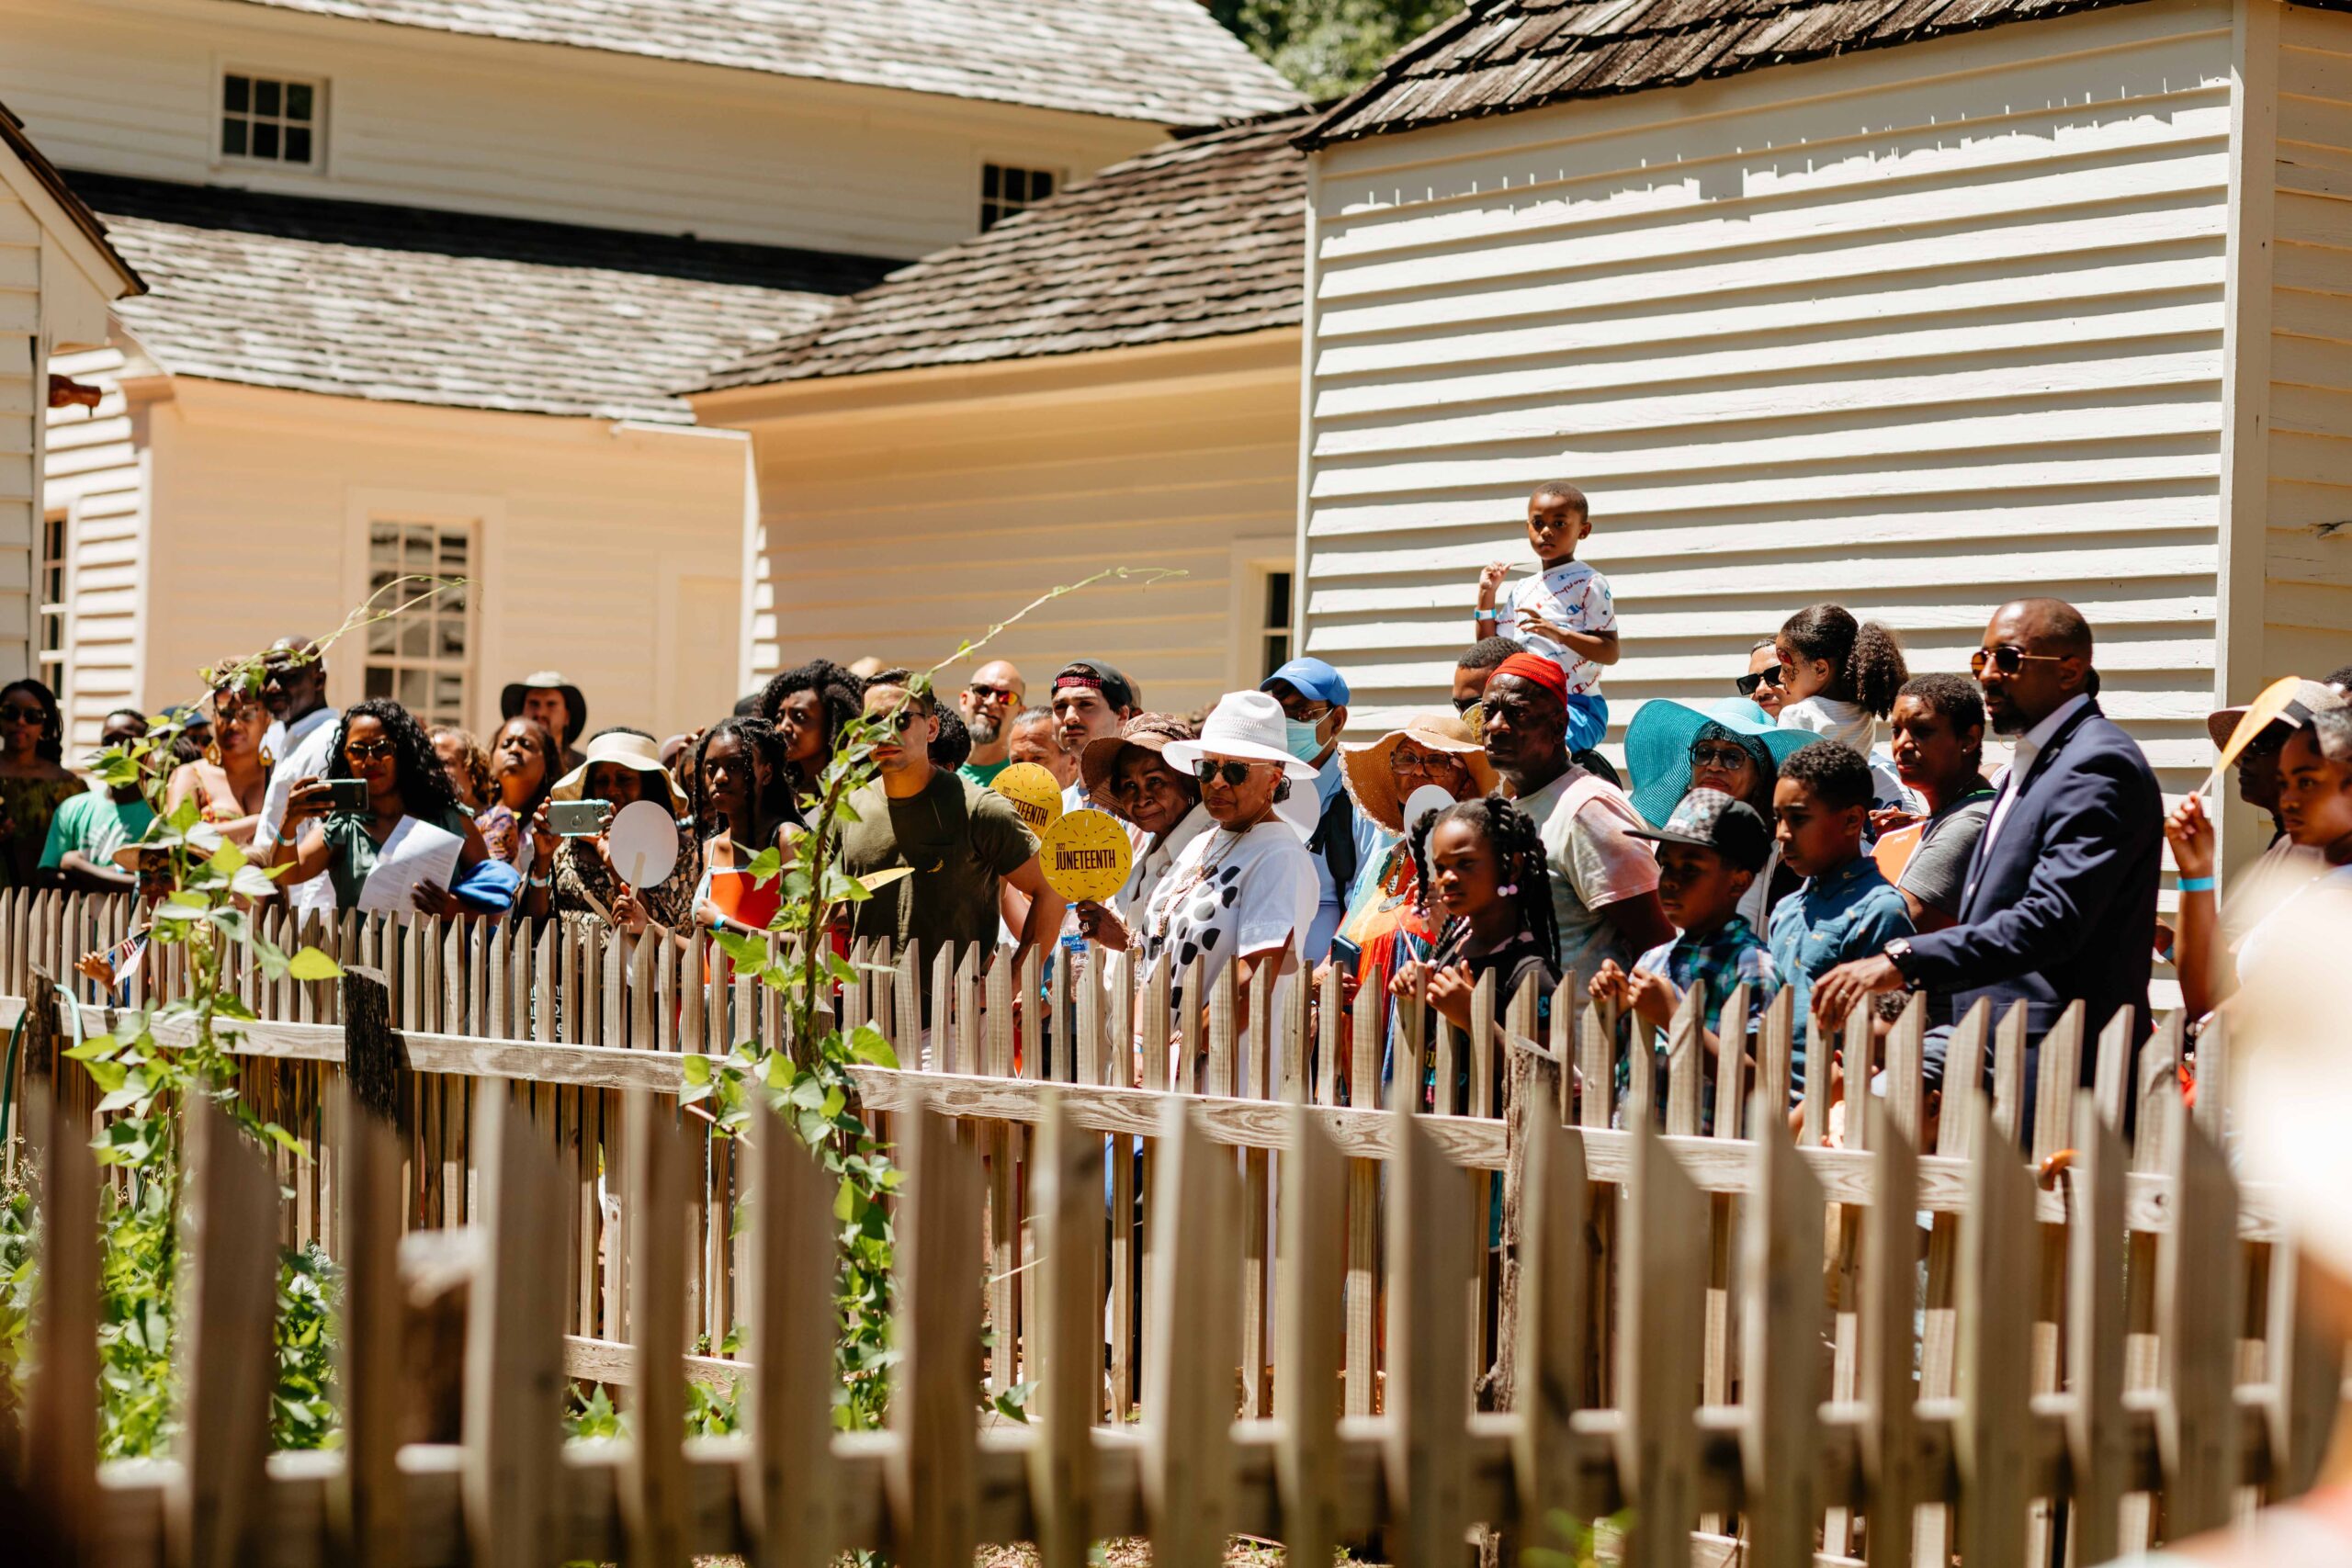 Guests at Juneteenth event on Smith Farm